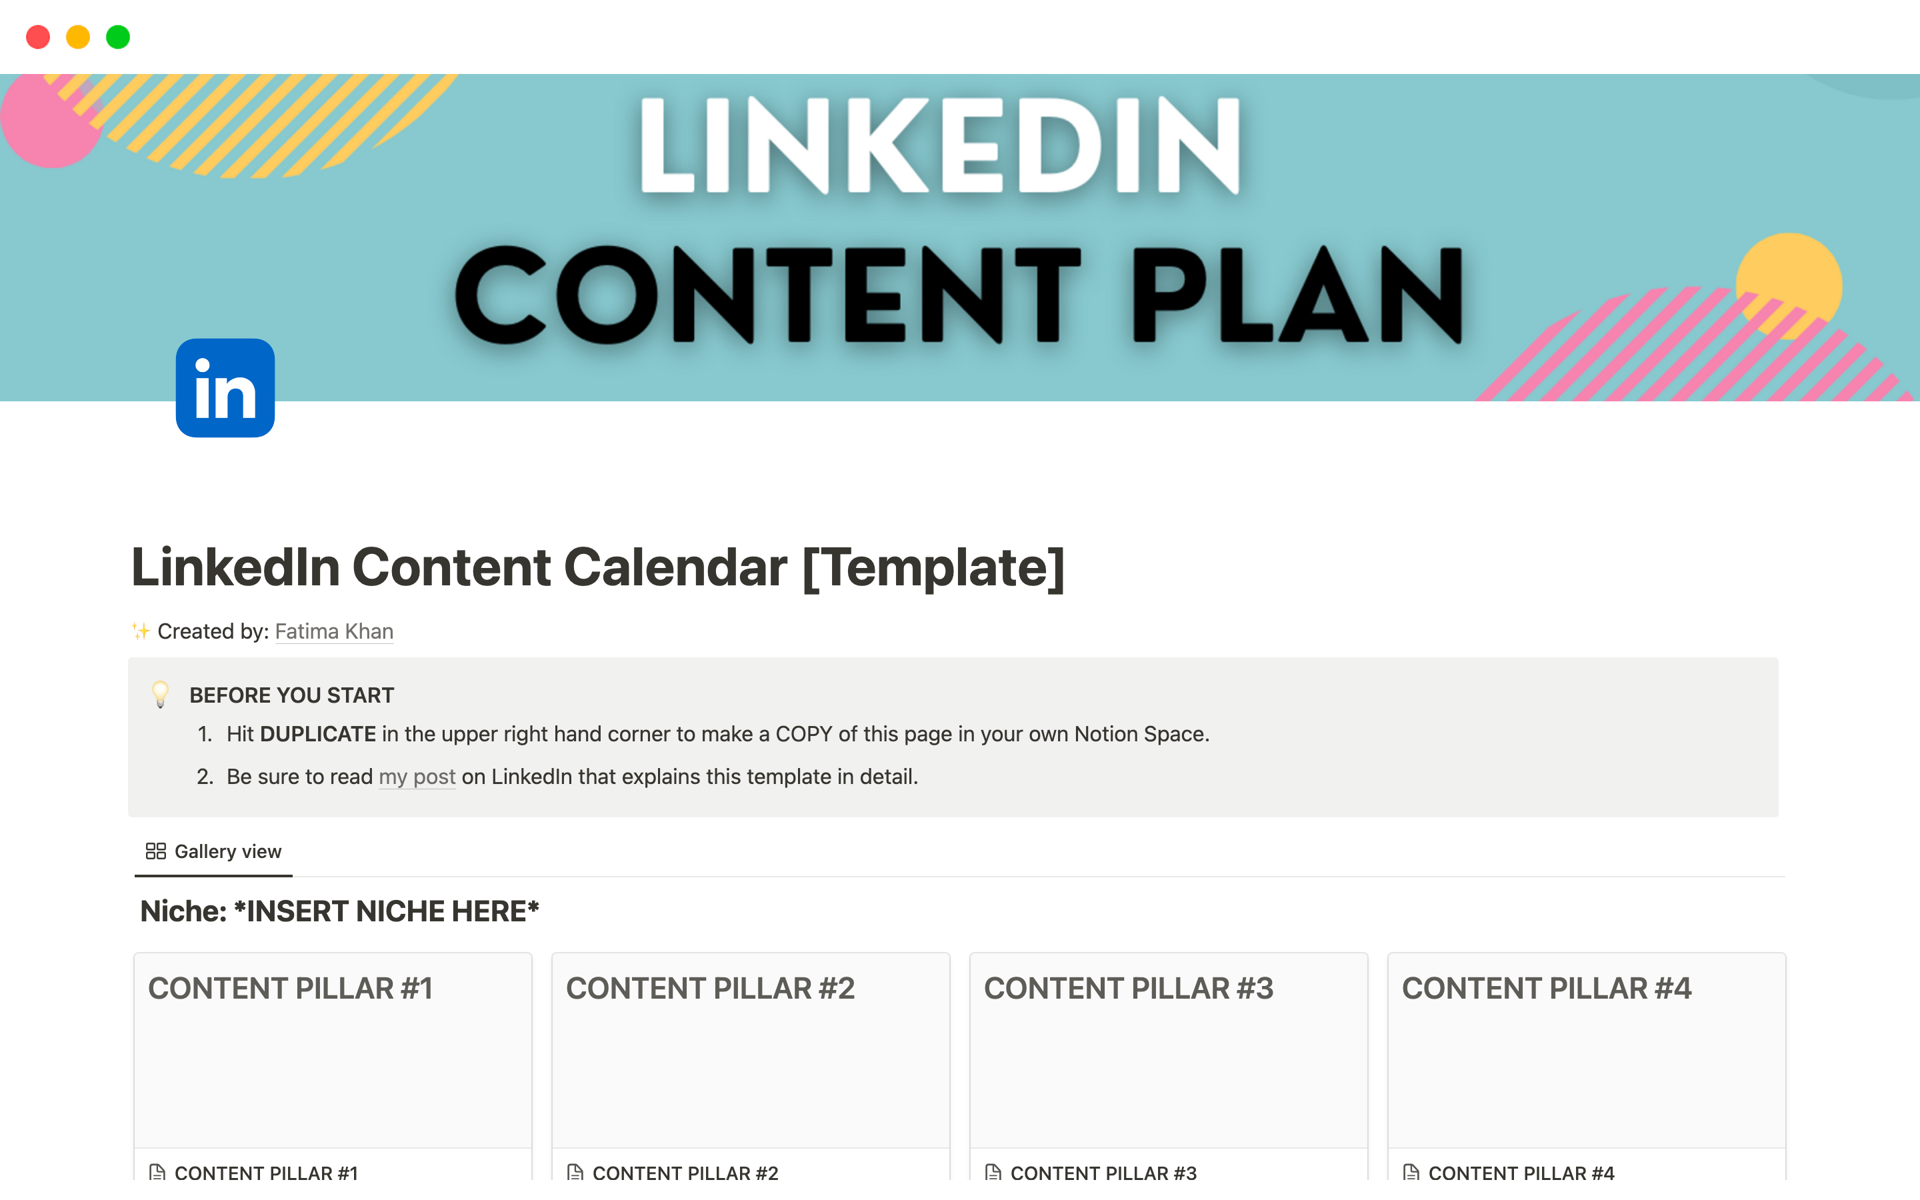 It is a LinkedIn content planning template. 